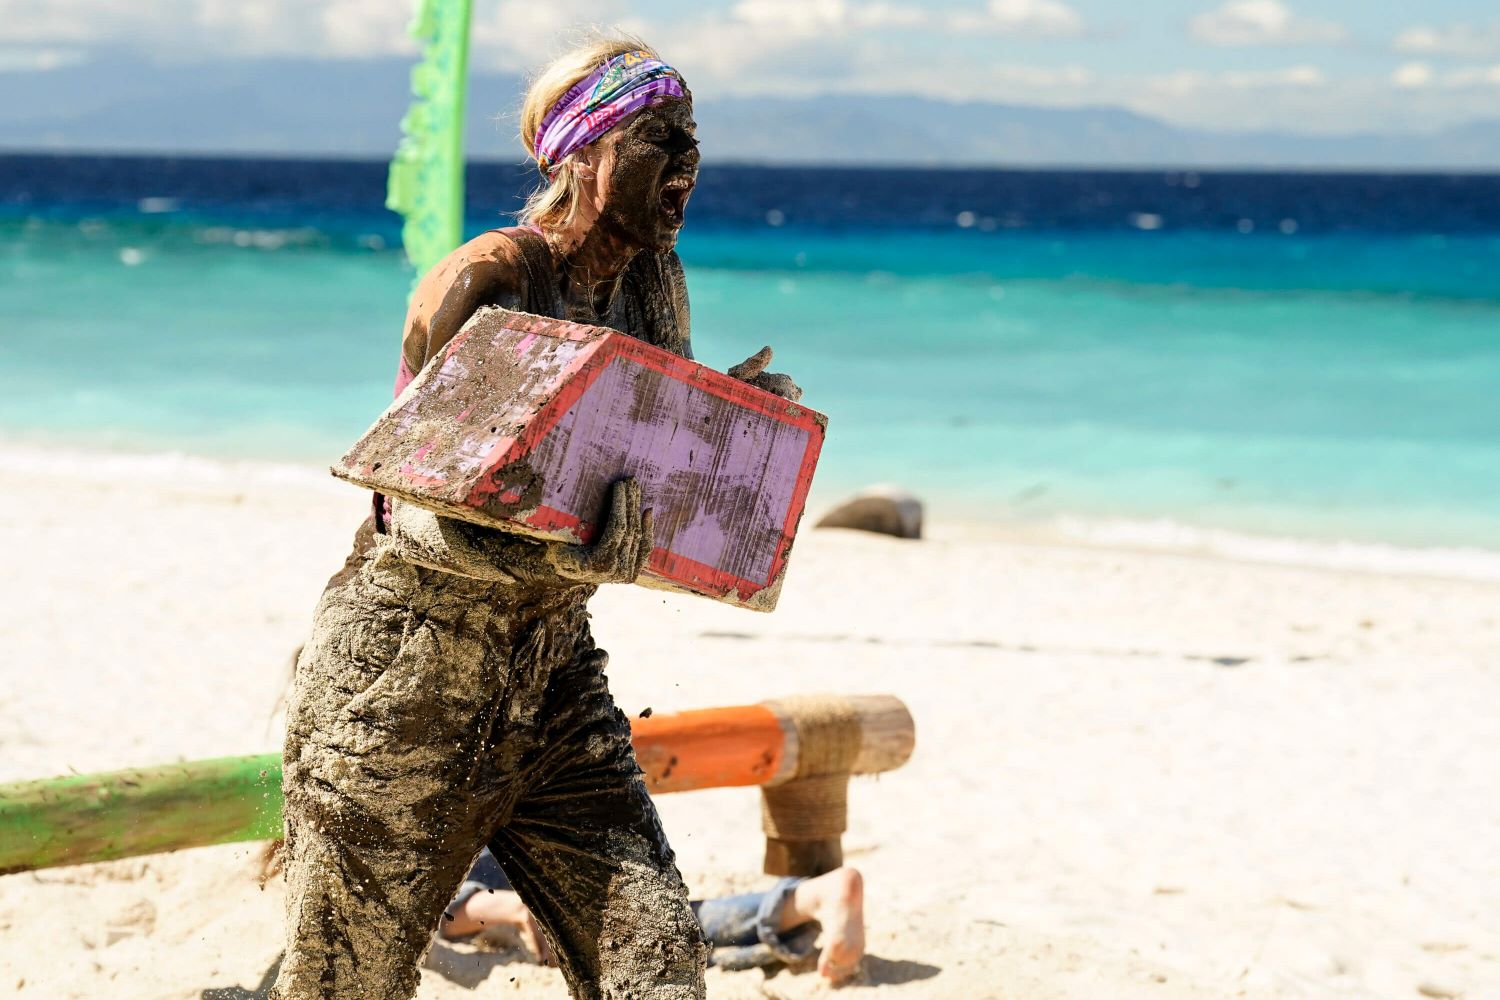 Carolyn Wiger competes during a Reward Challenge in 'Survivor 44' on CBS. Carolyn wears pants and a tank top caked in mud and sand while carrying a purple puzzle piece.